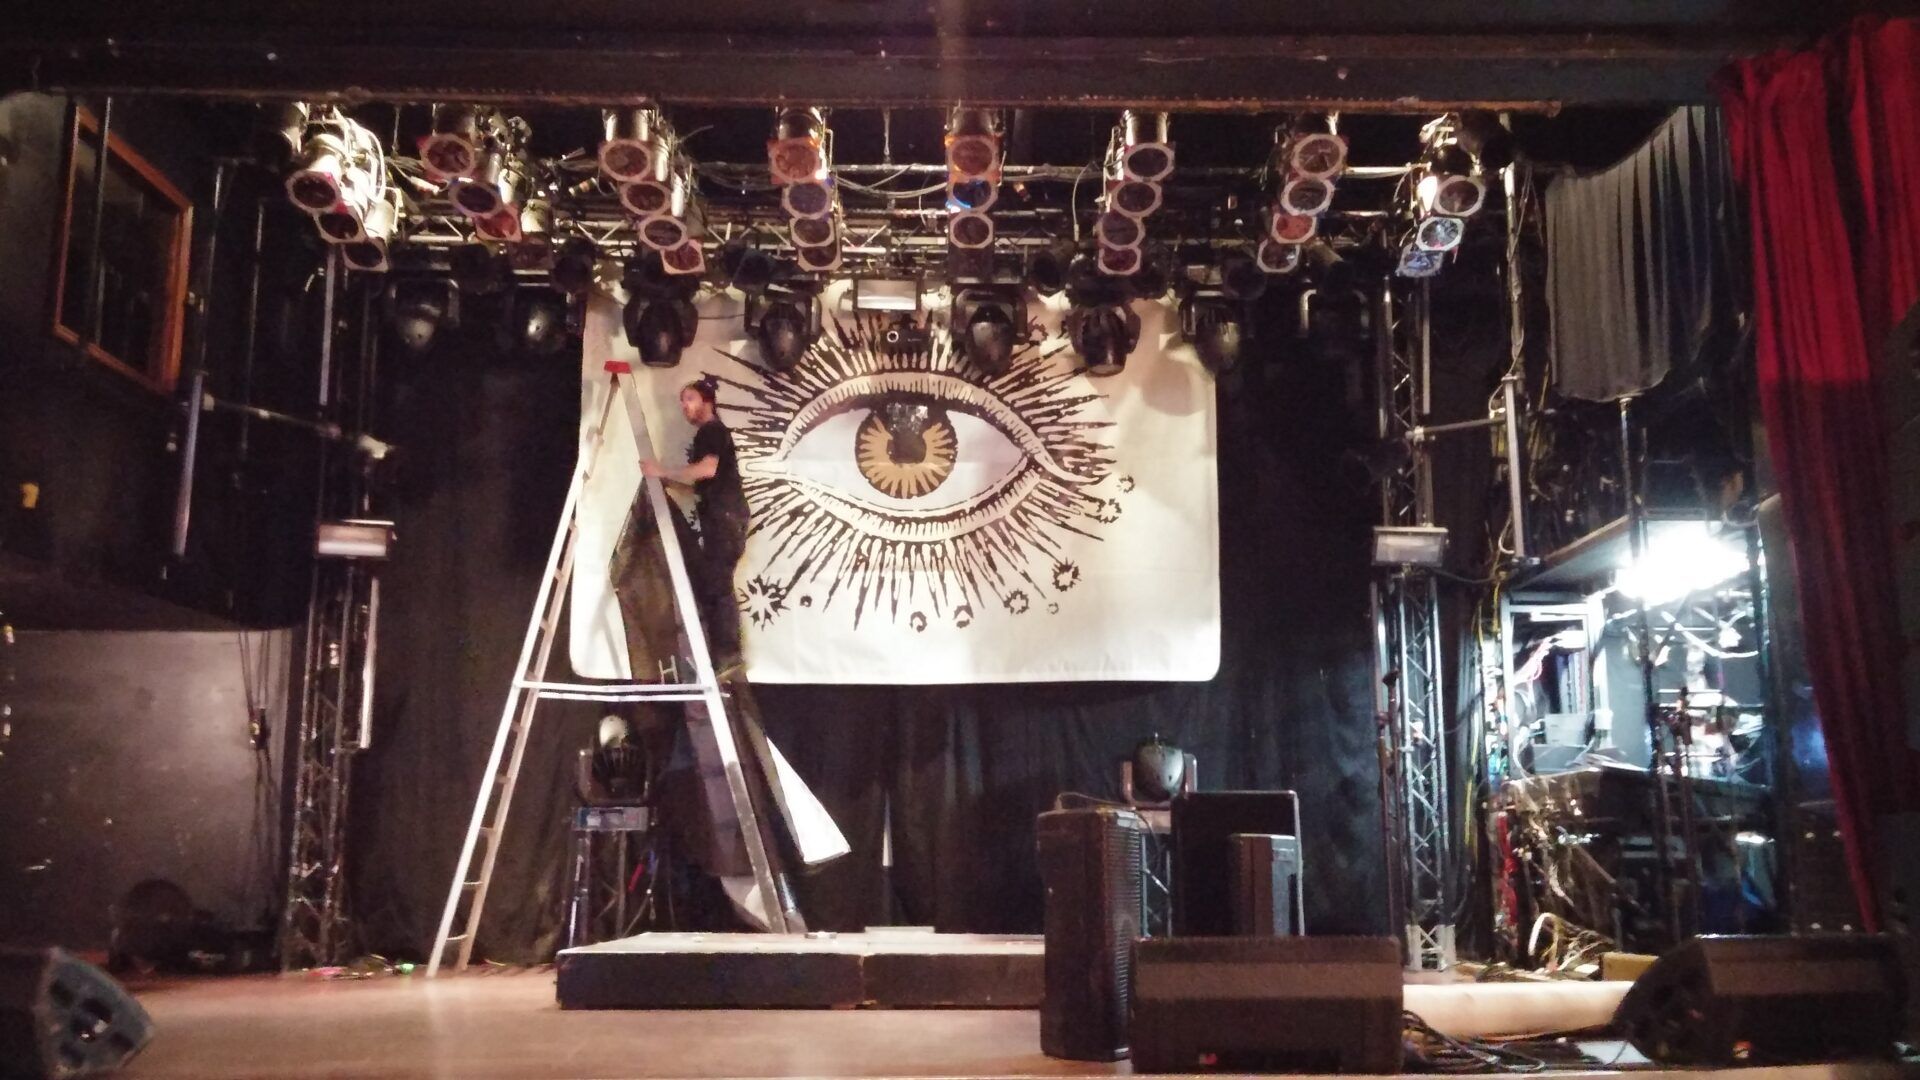 Getting set up for the show in Toronto. We had that eye looking at us every show.